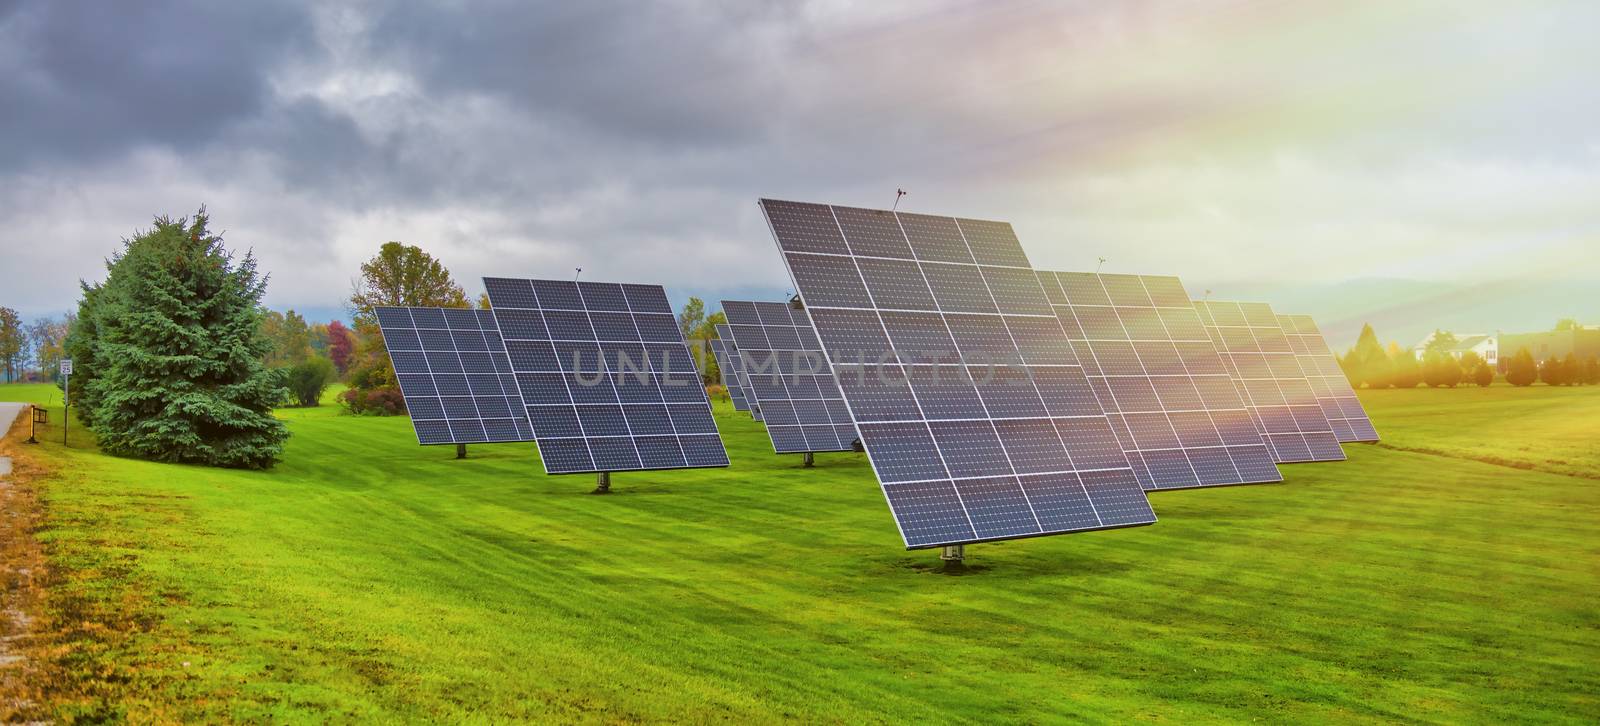 Solar panels at sunrise with cloudy sky in the countryside. Sola by jovannig